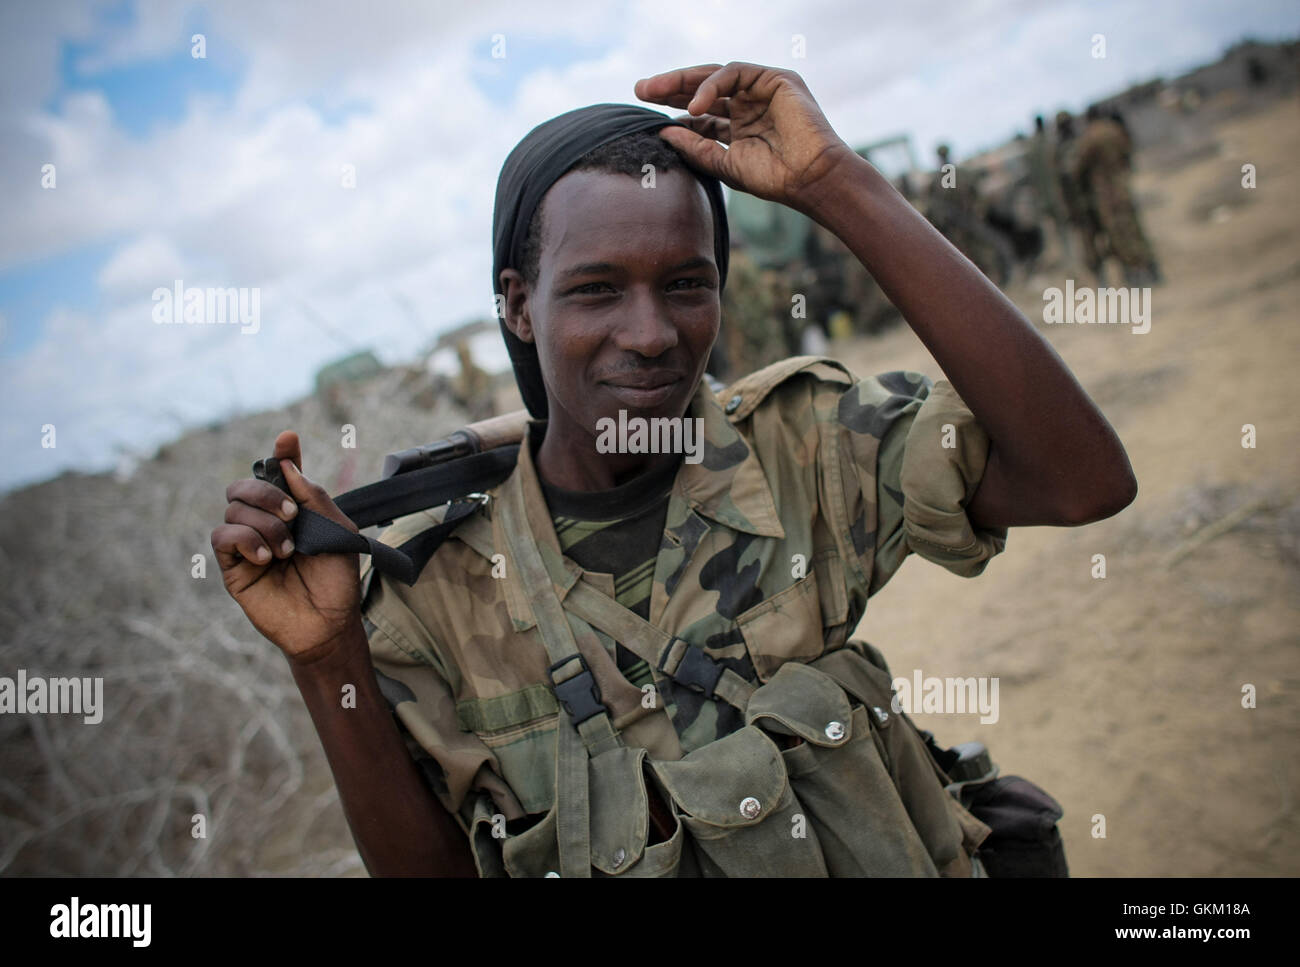 SOMALIA. Saa'moja / Kisamayo: In a handout photograph released by the African Union-United Nations Information Support Team 01 October, a soldier of the Somali National Army (SNA) gestures in Saa'moja, an area approx. 7km outside the Somali port city of Kismayo. For the last two months, the African Union Mission in Somalia (AMISOM)'s Kenyan Contingent in support of the SNA has been steadily liberating areas and villages in Southern Somalia formally under the control of the Al Qaeda-affiliated extremist group Al Shabaab, which has brought them to the outskirt's of the group's last major strongh Stock Photo